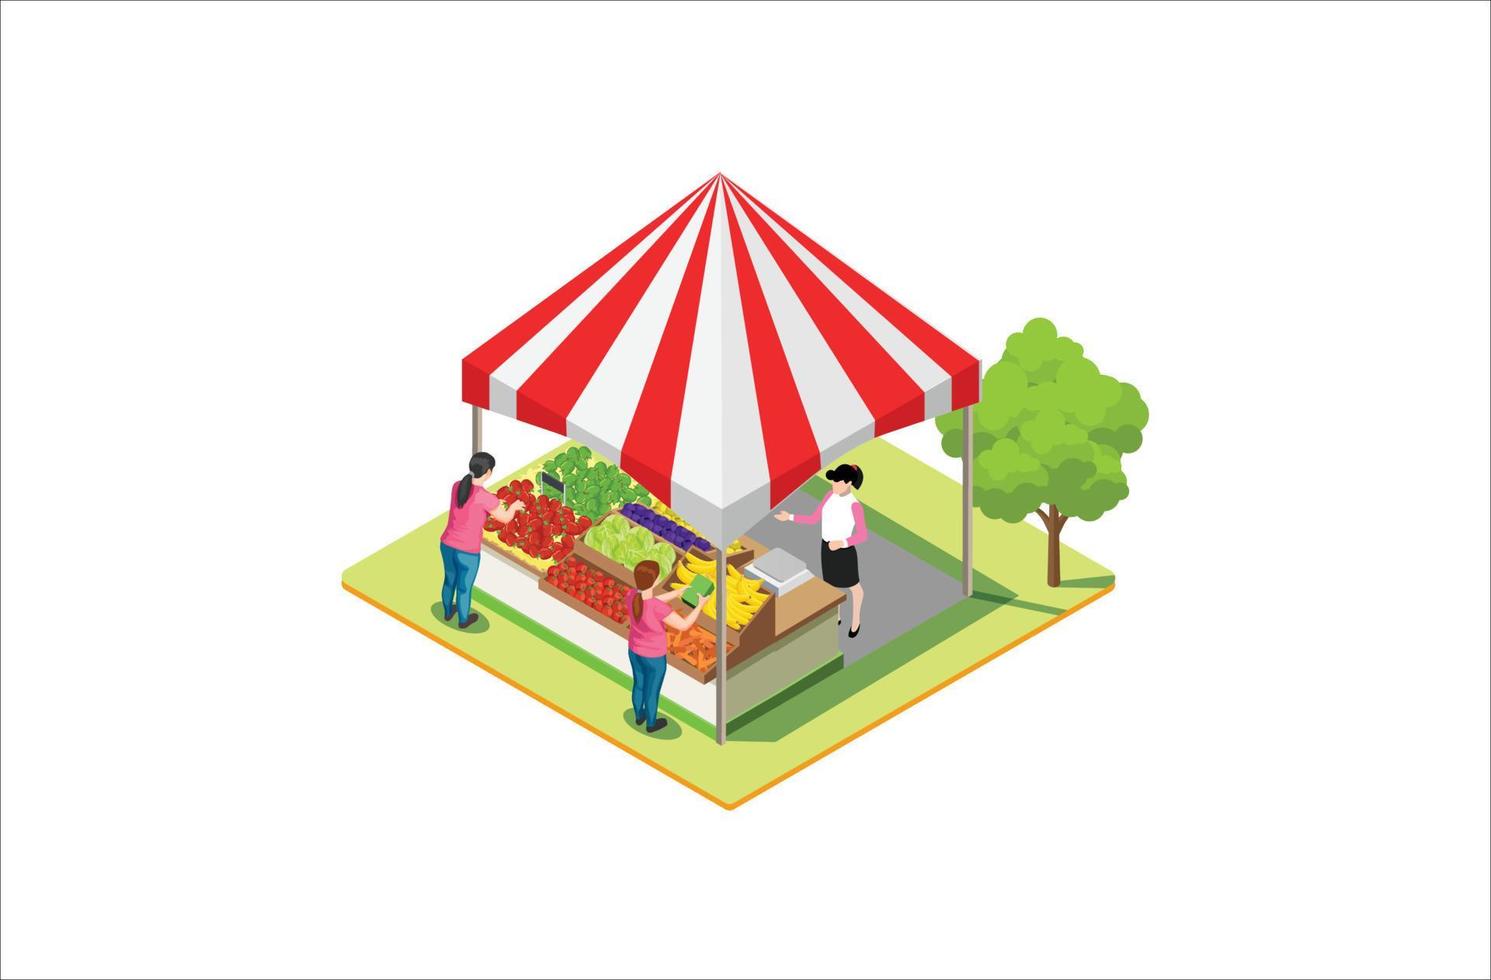 Modern Isometric Product Local market. Farmers selling healthy natural farming products in containers outdoor store with vegetables and fruits vector isometric concept. Suitable for Graphic Asset